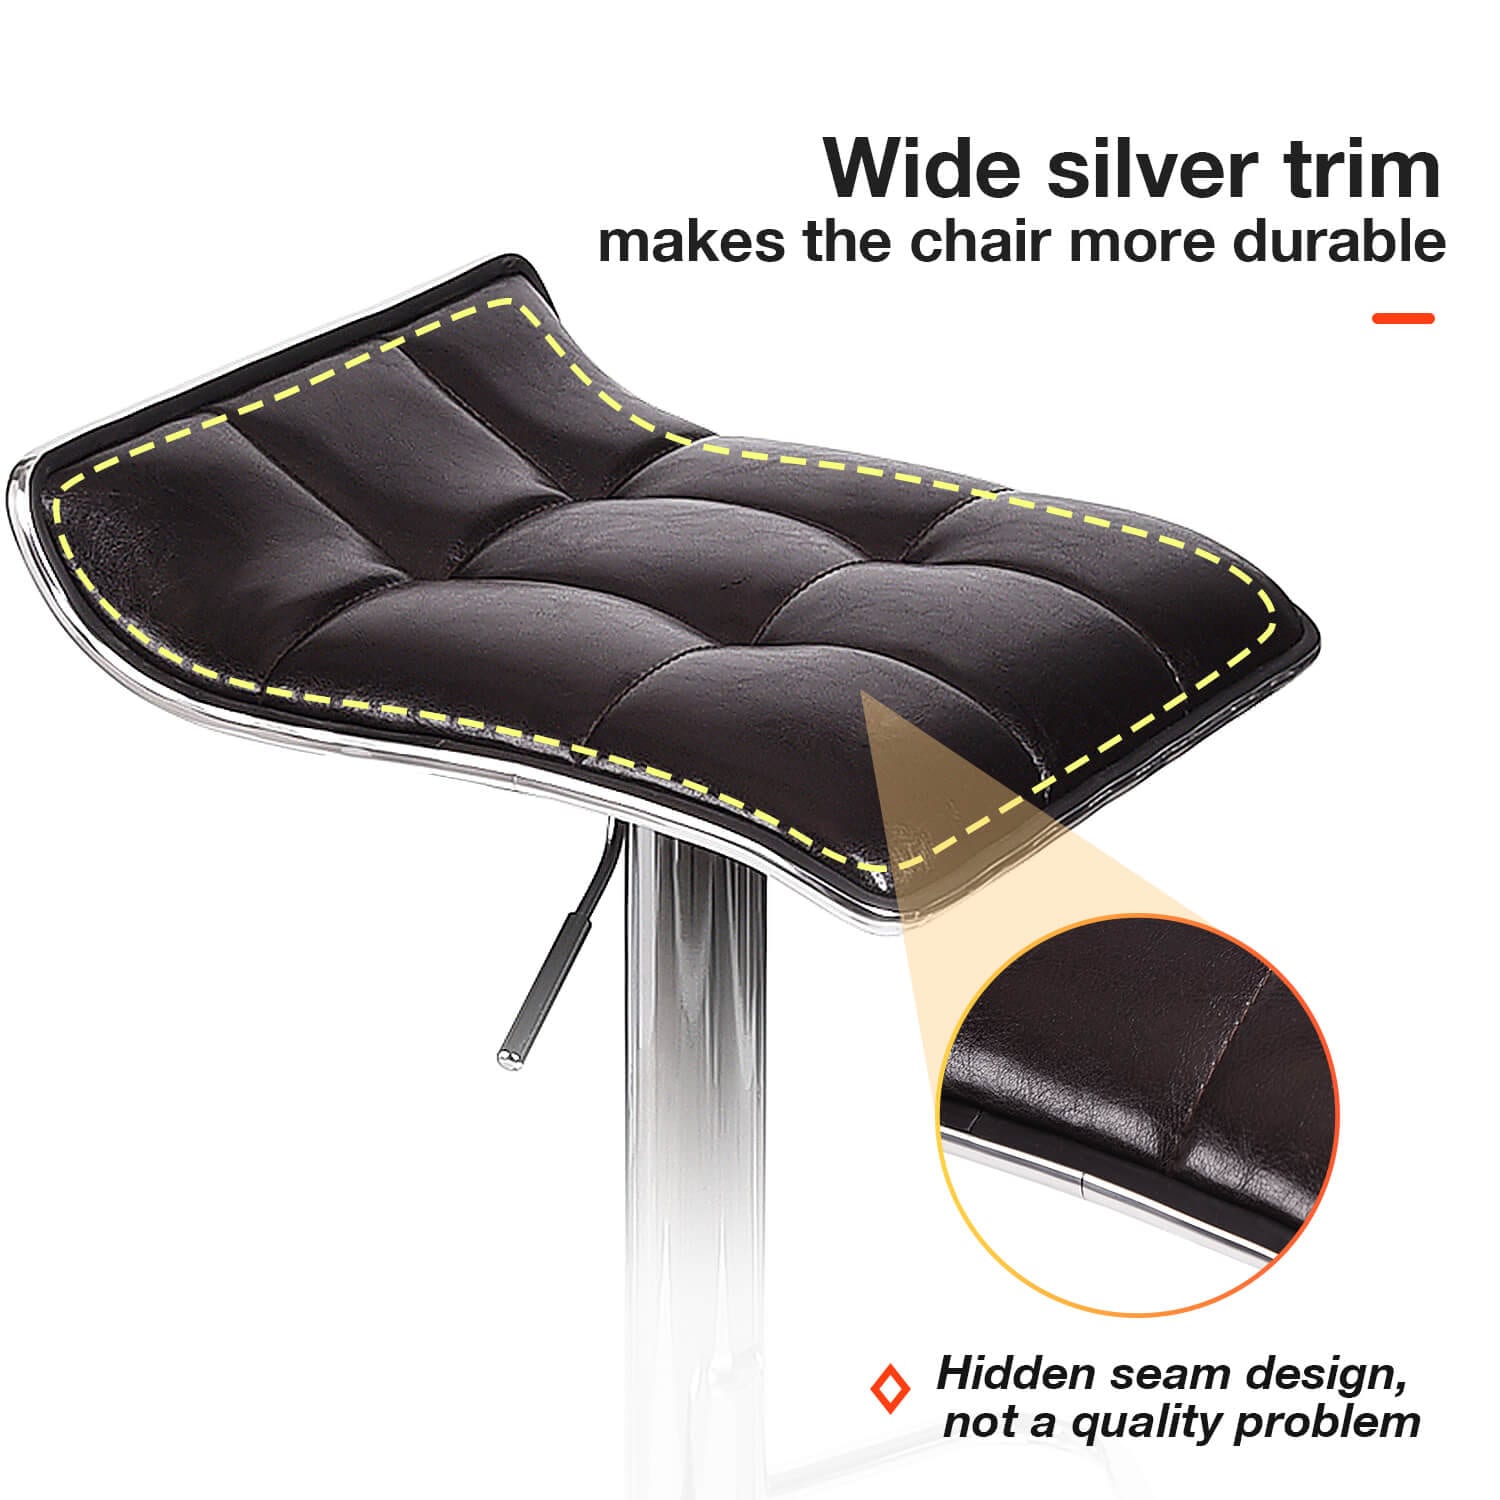 Elecwish Grid Brown Bar Stool OW006 has wide silver trim which makes the chair more durable